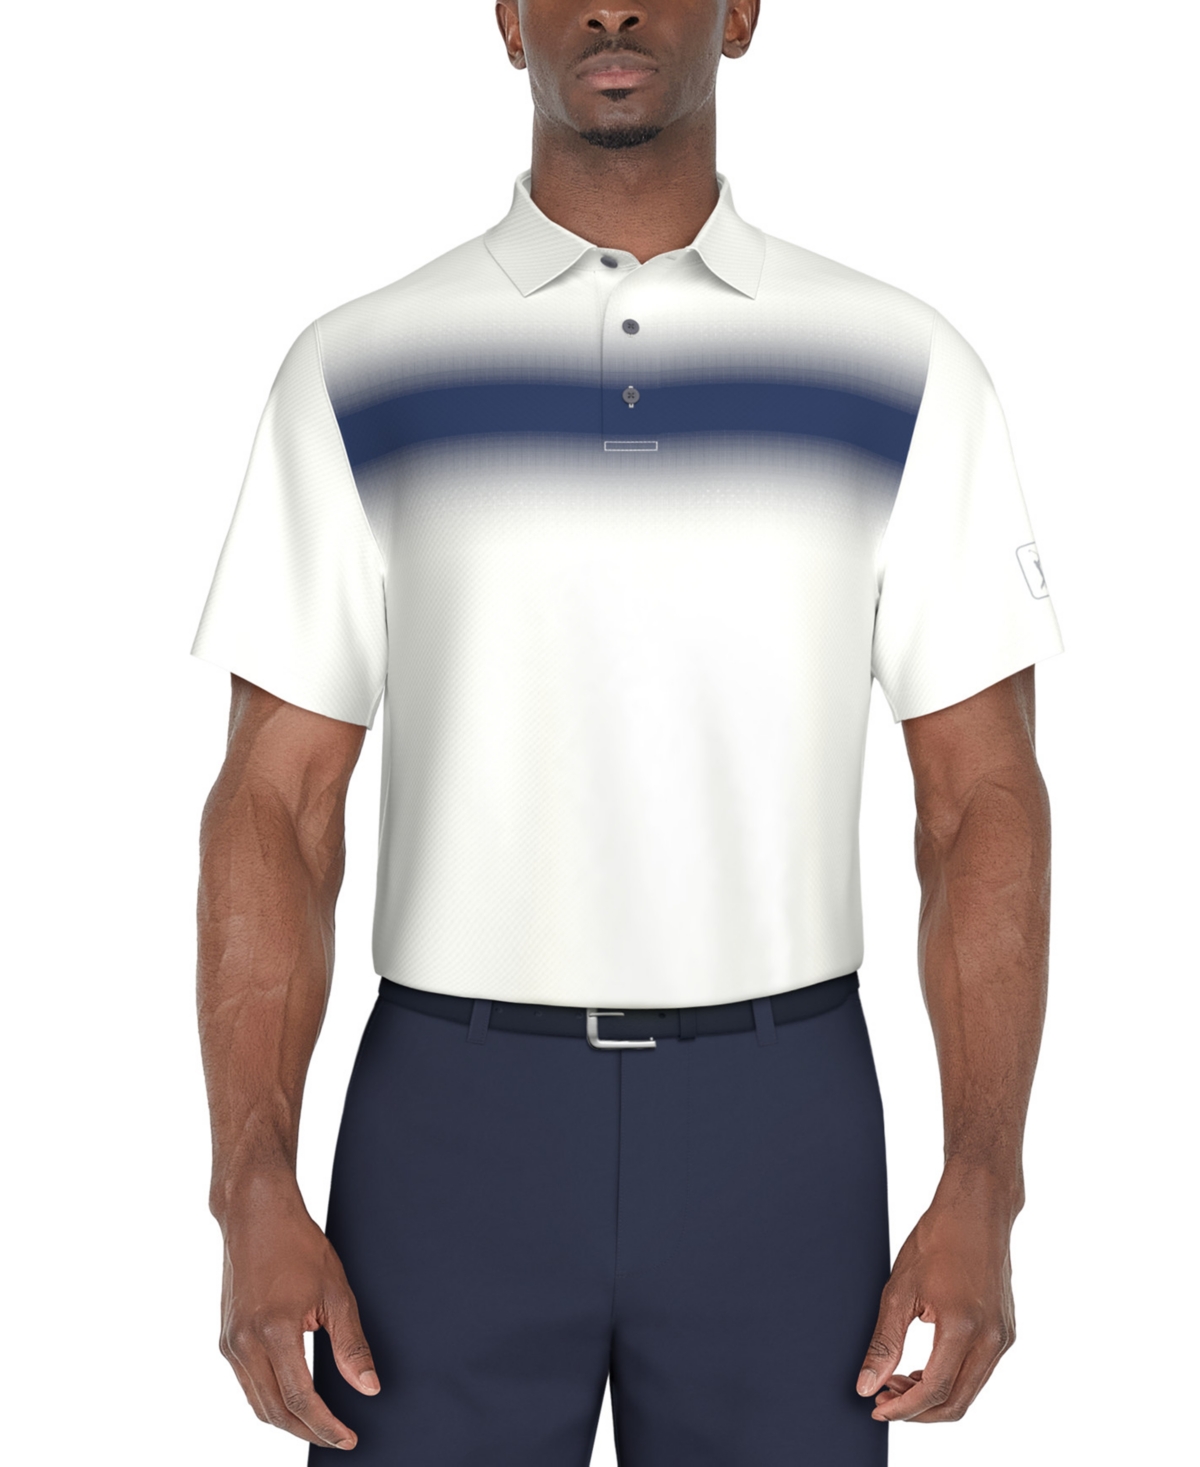 Pga Tour Men's Short Sleeve Textured Performance Polo Shirt In Bright Whi